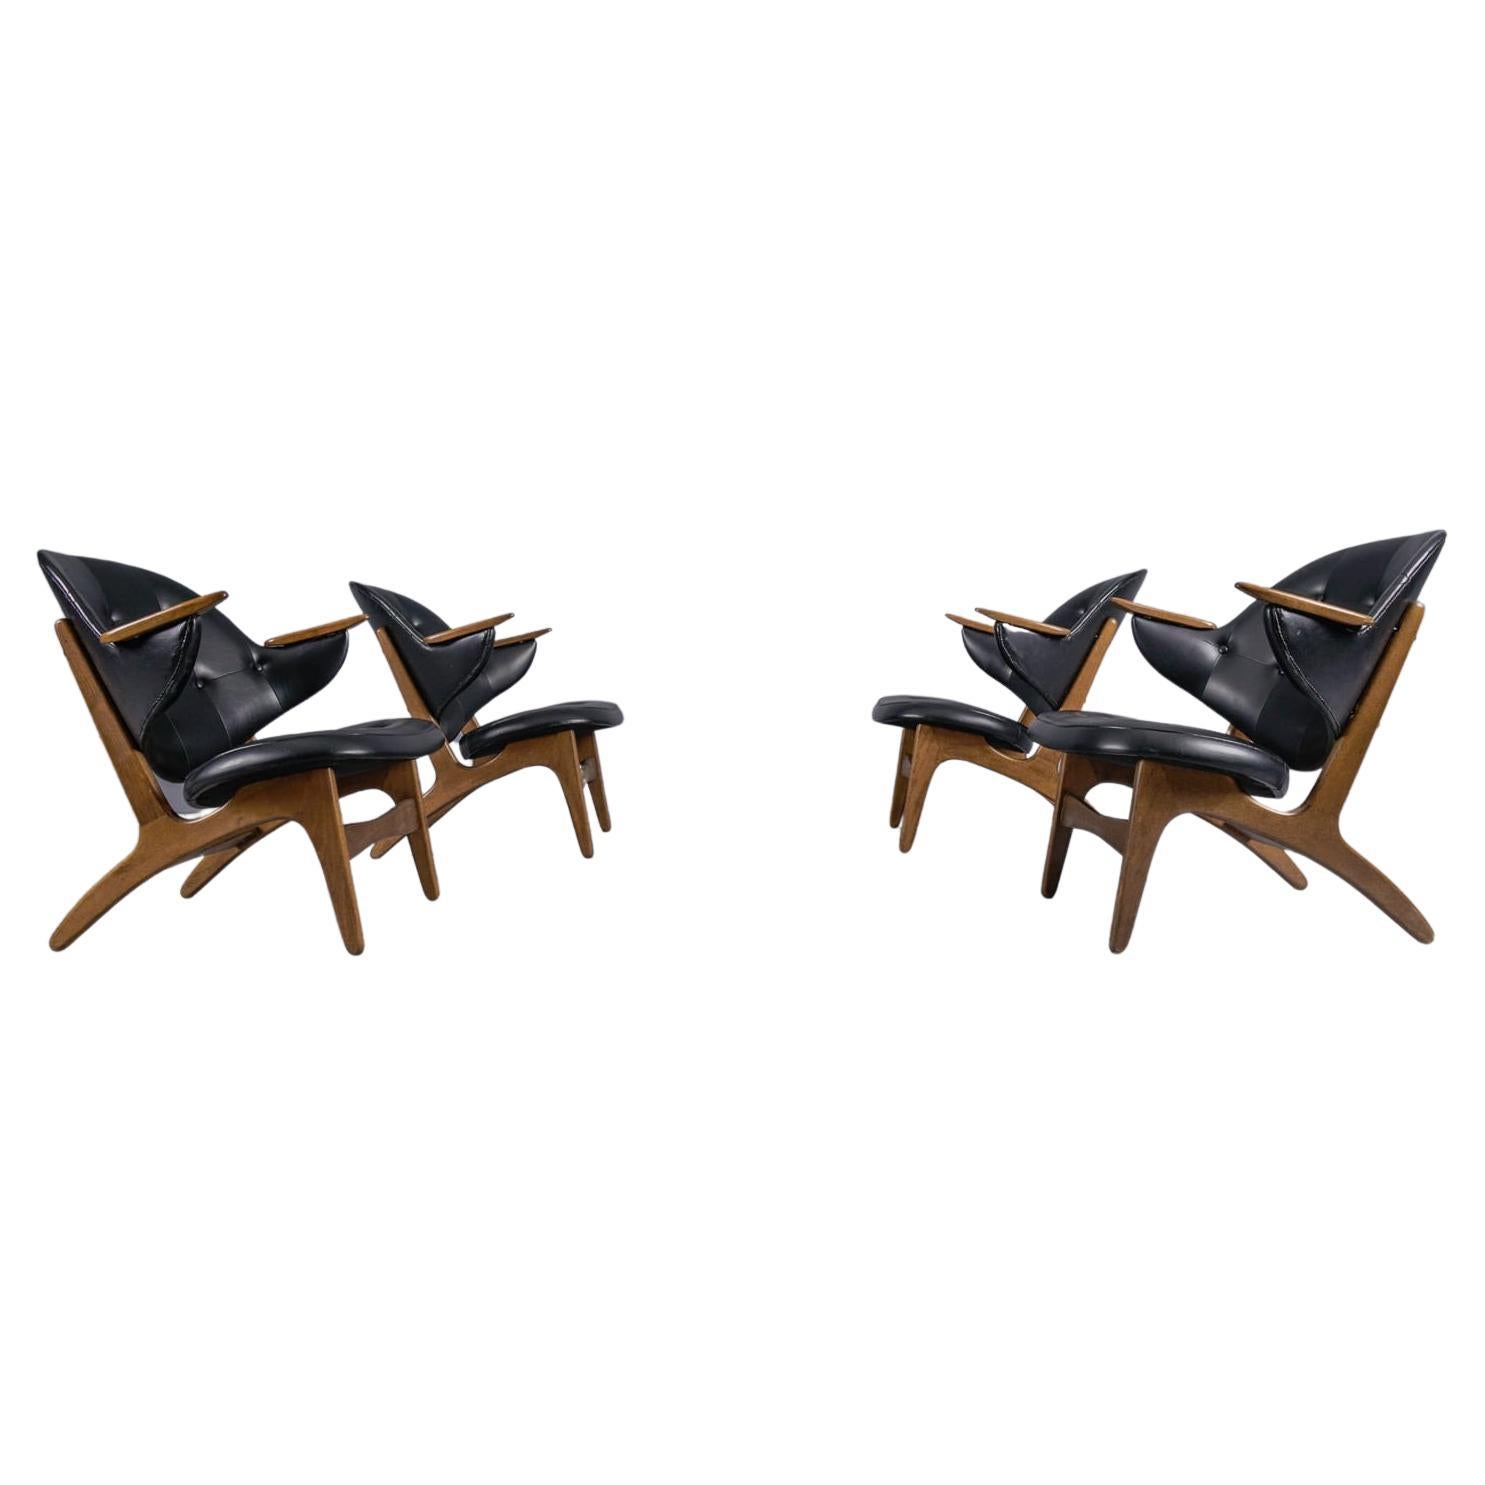 Set of 4 Rare Model 33 Danish Easy Chairs Designed by Carl Edward Matthes, 1950s For Sale